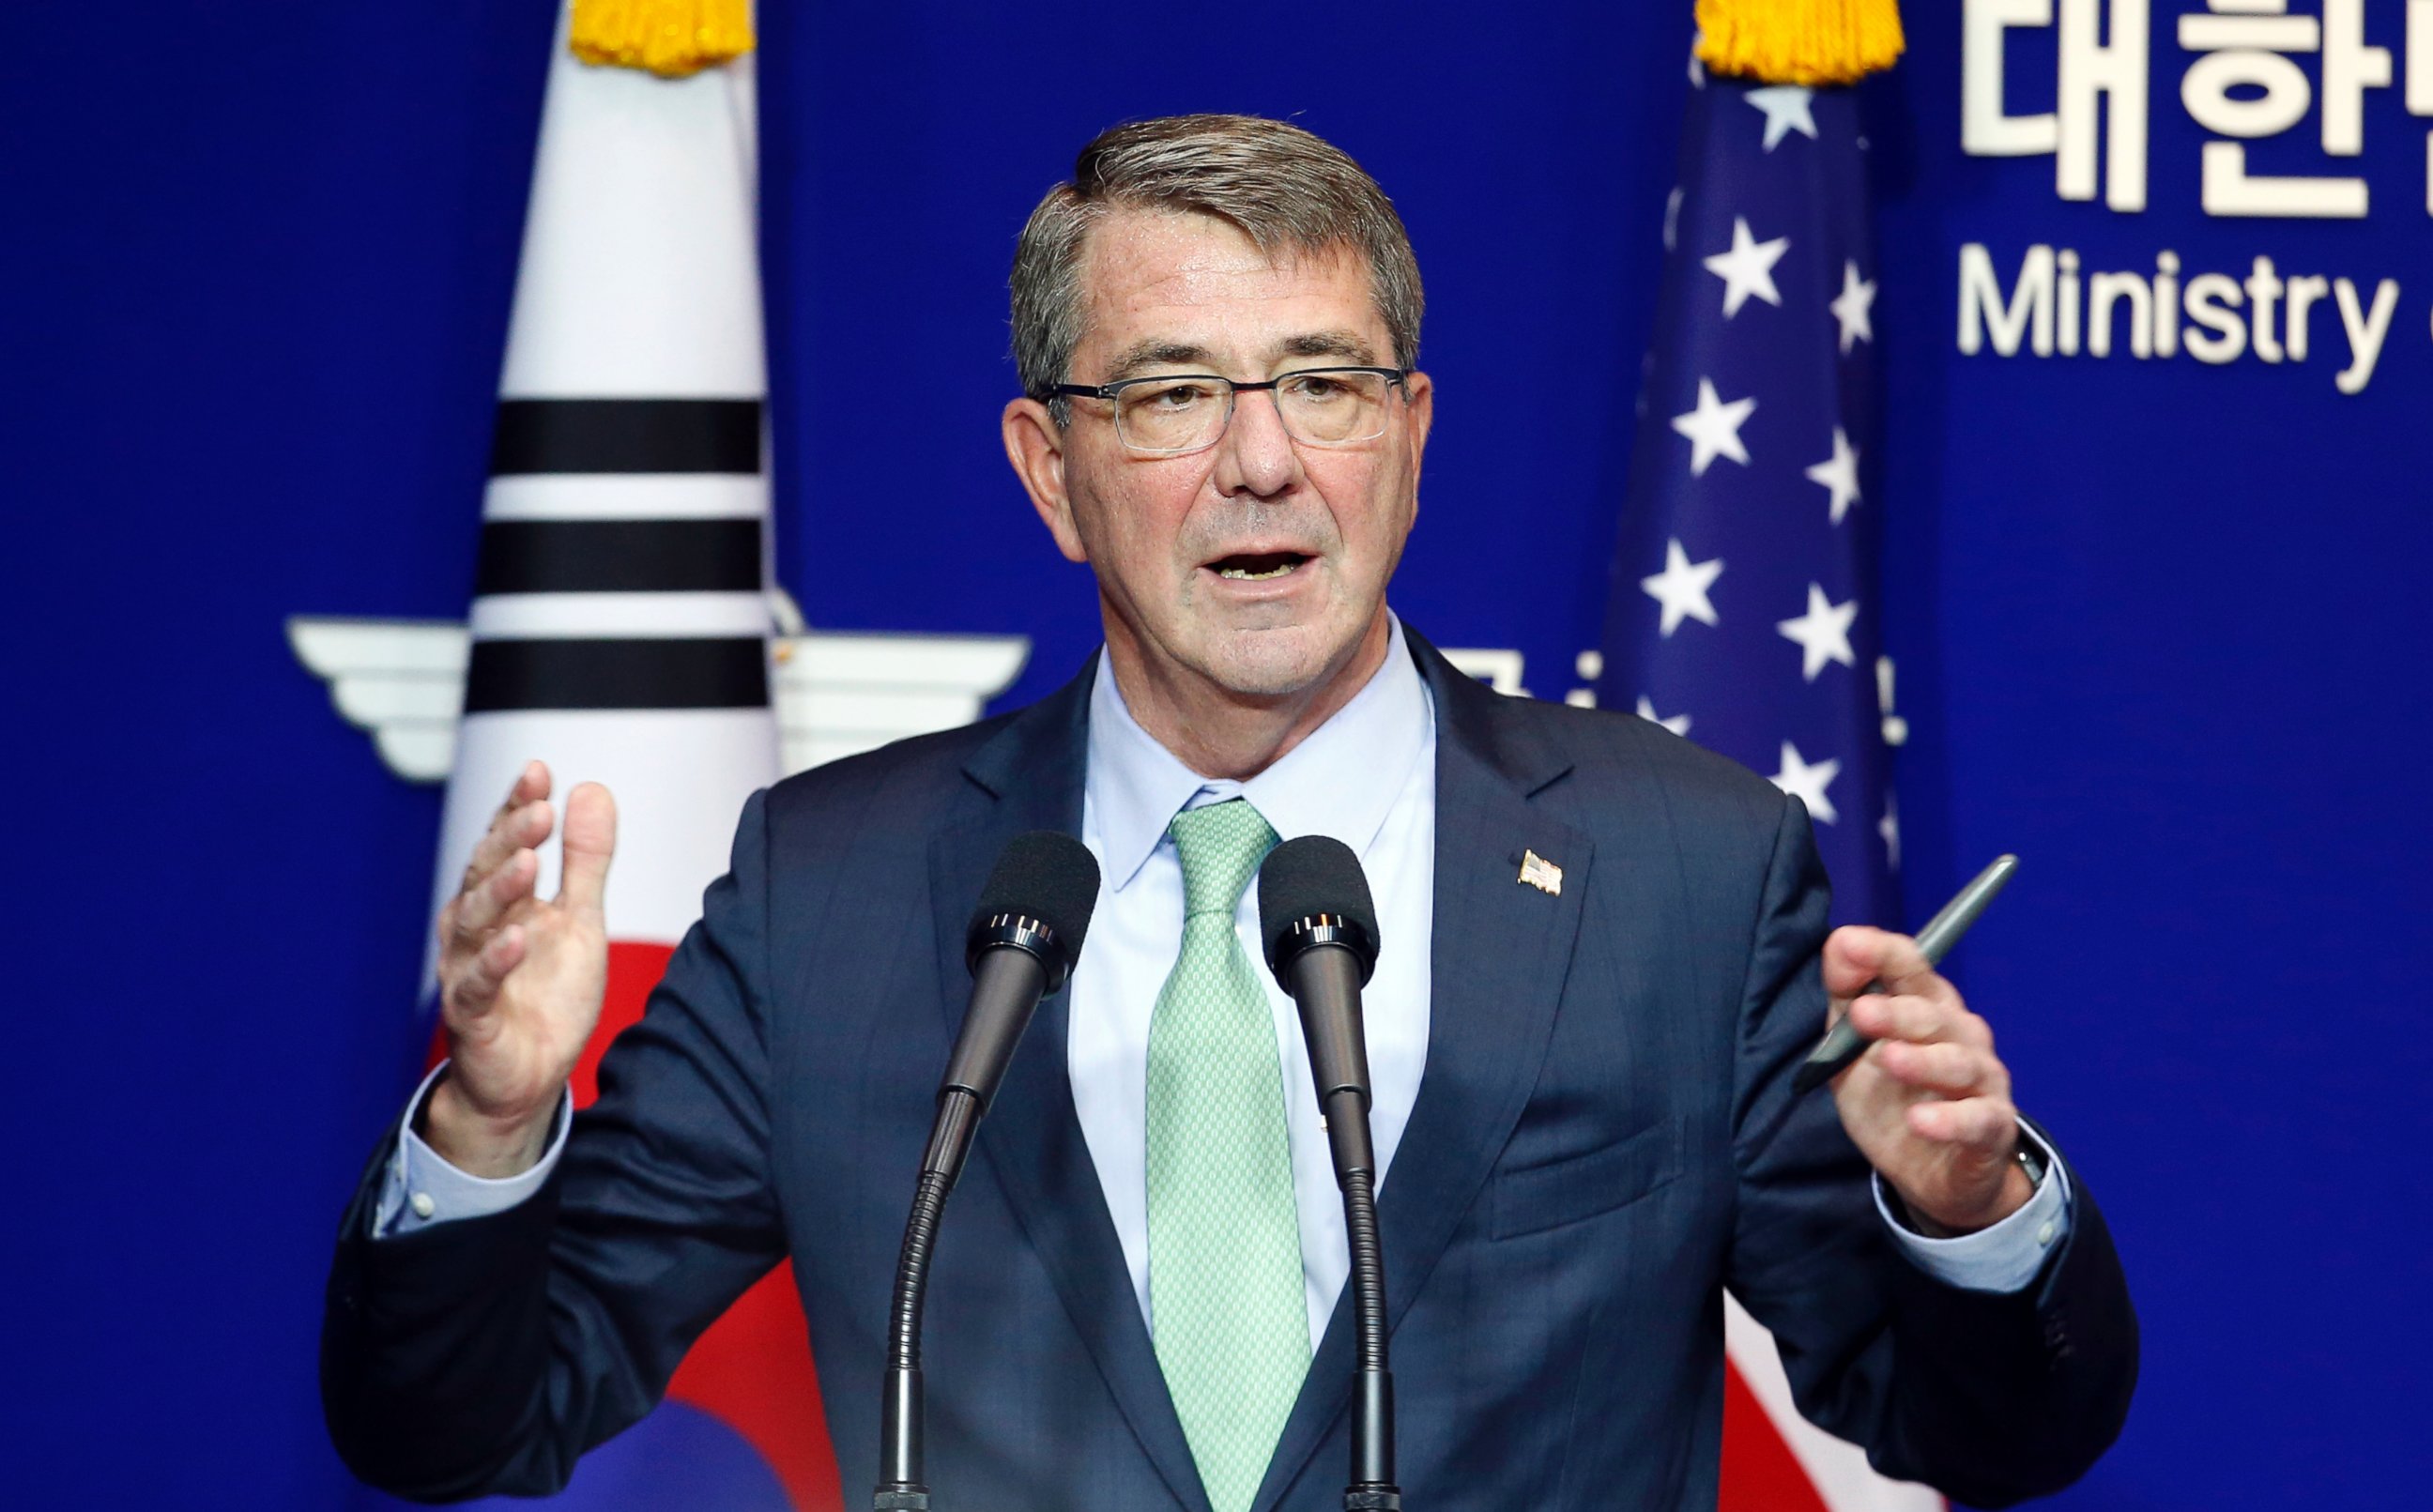 PHOTO: U.S. Defense Secretary Ash Carter during a joint news conference with South Korean Defense Minister Han Min Koo after the 47th Security Consultative Meeting at Defense Ministry on Nov. 2, 2015. in Seoul, South Korea.